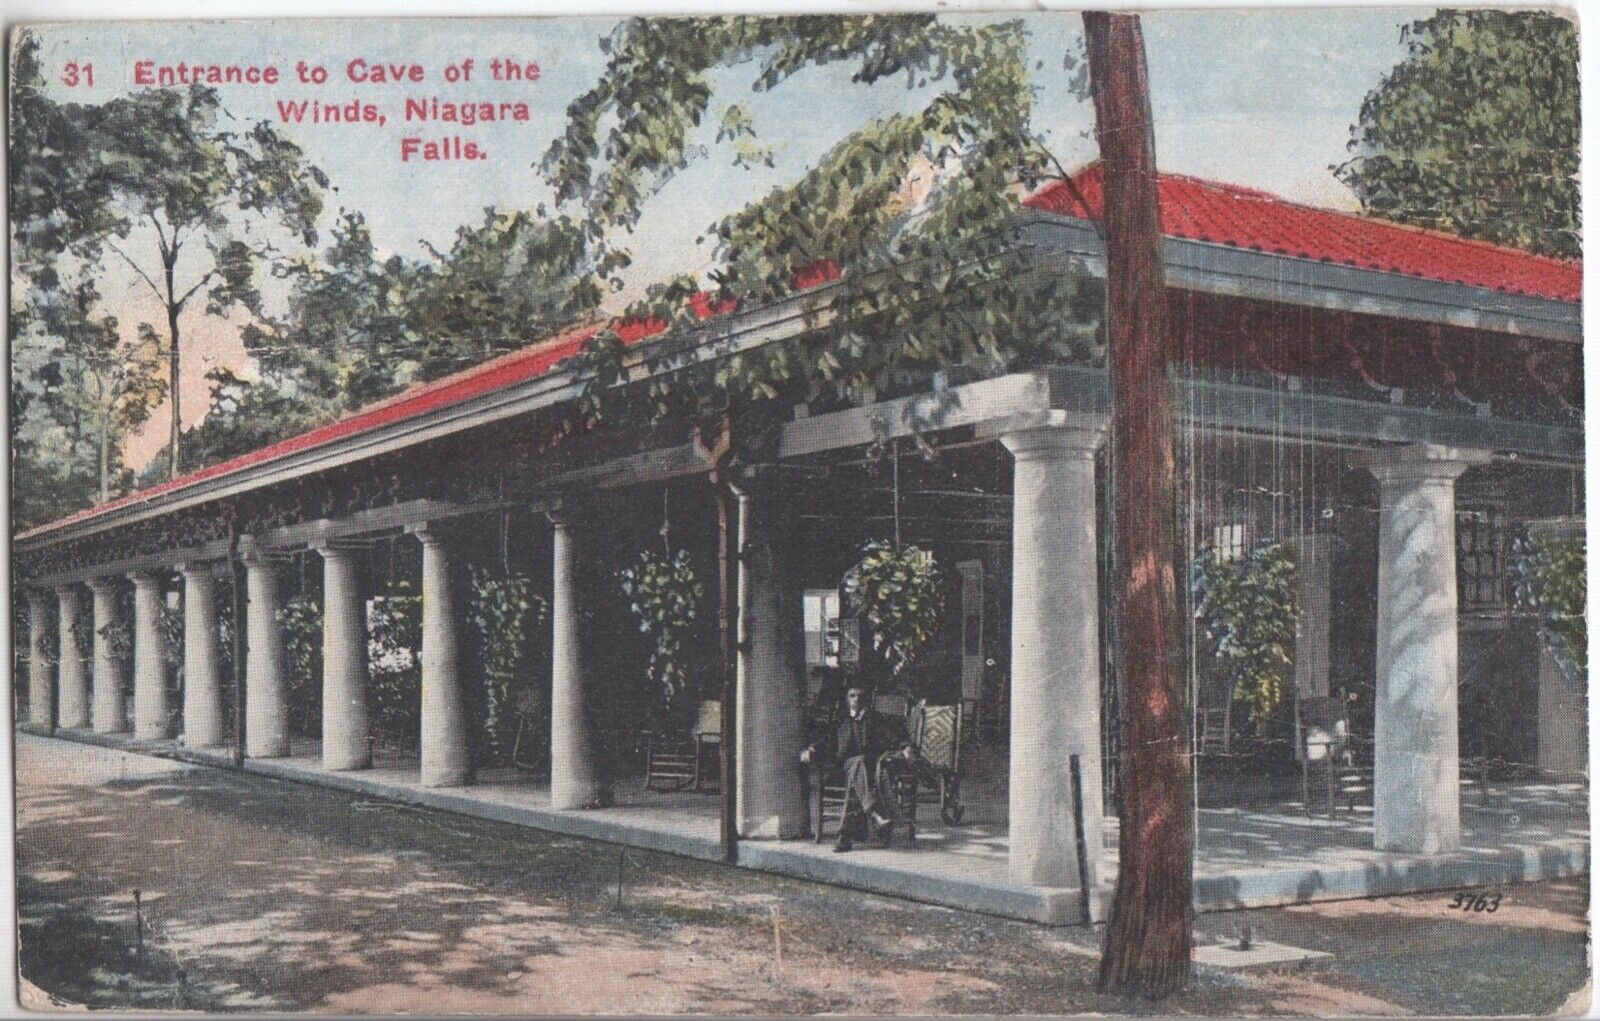 Entrance to Cave of the Winds - Niagara Falls New York - PMed 1915 Danville PA 